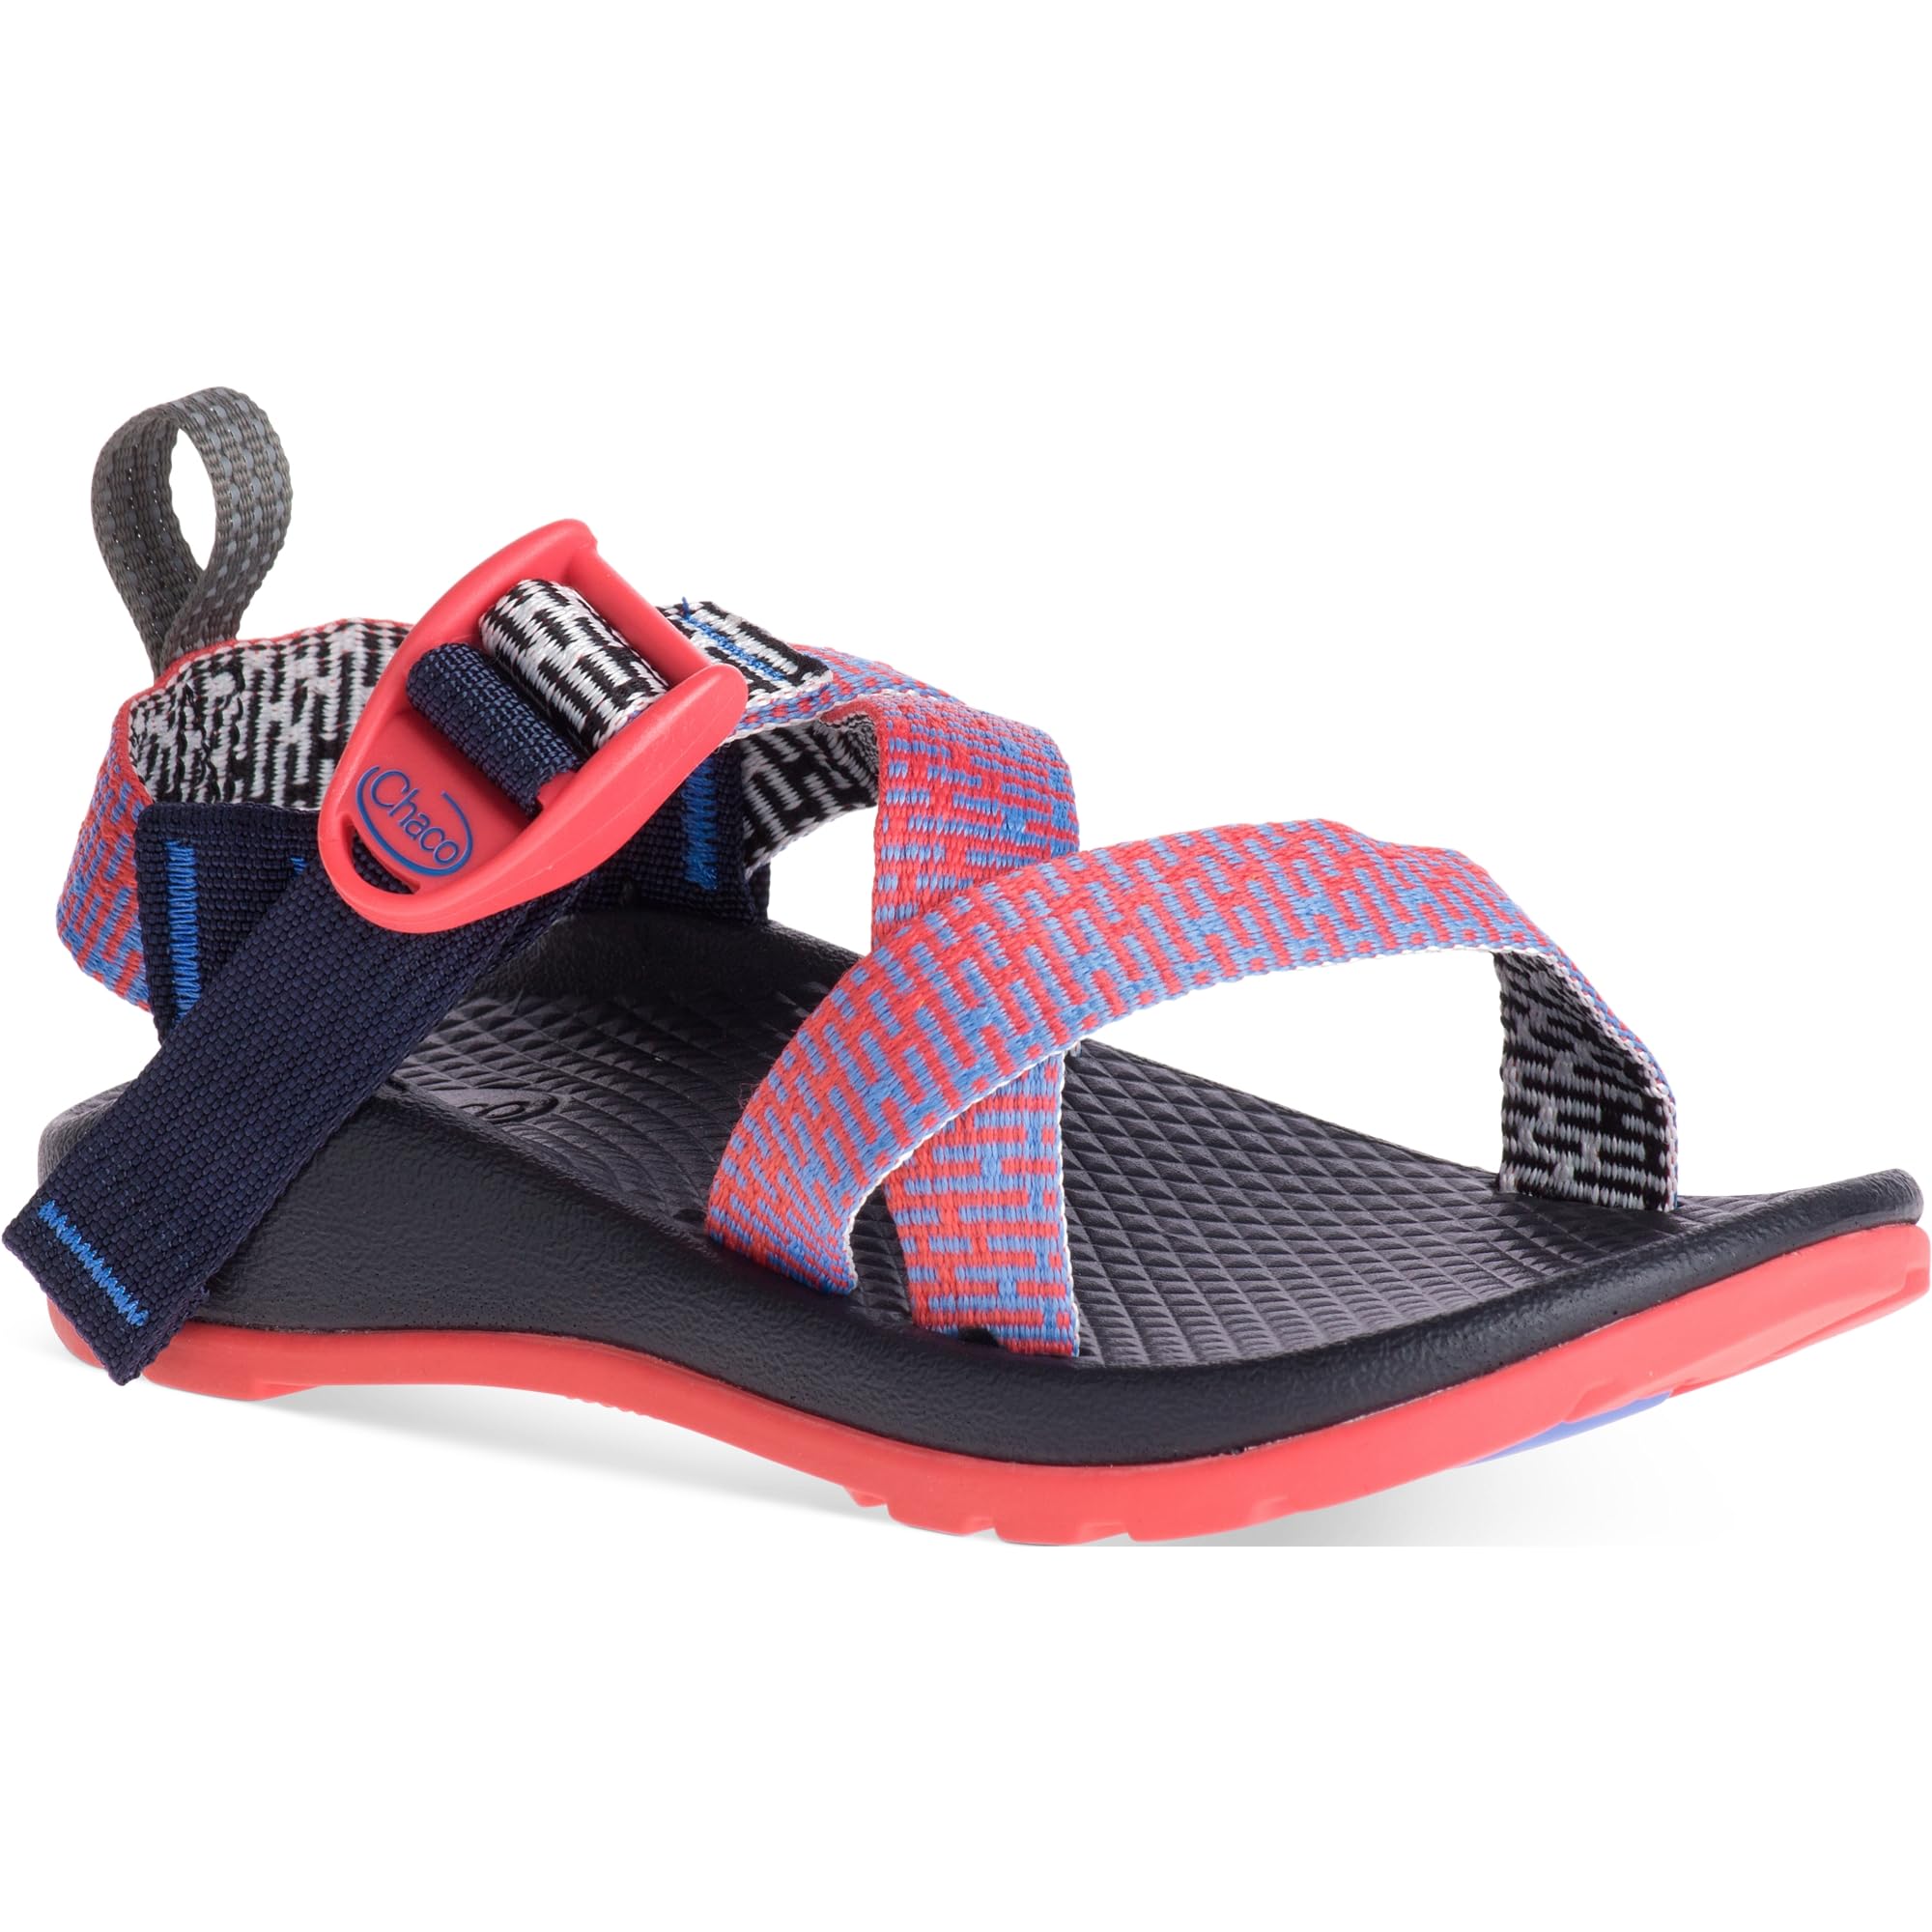 Chaco-womens Z1 Ecotread Sport Sandal, Penny Coral, 2 Big Kid US